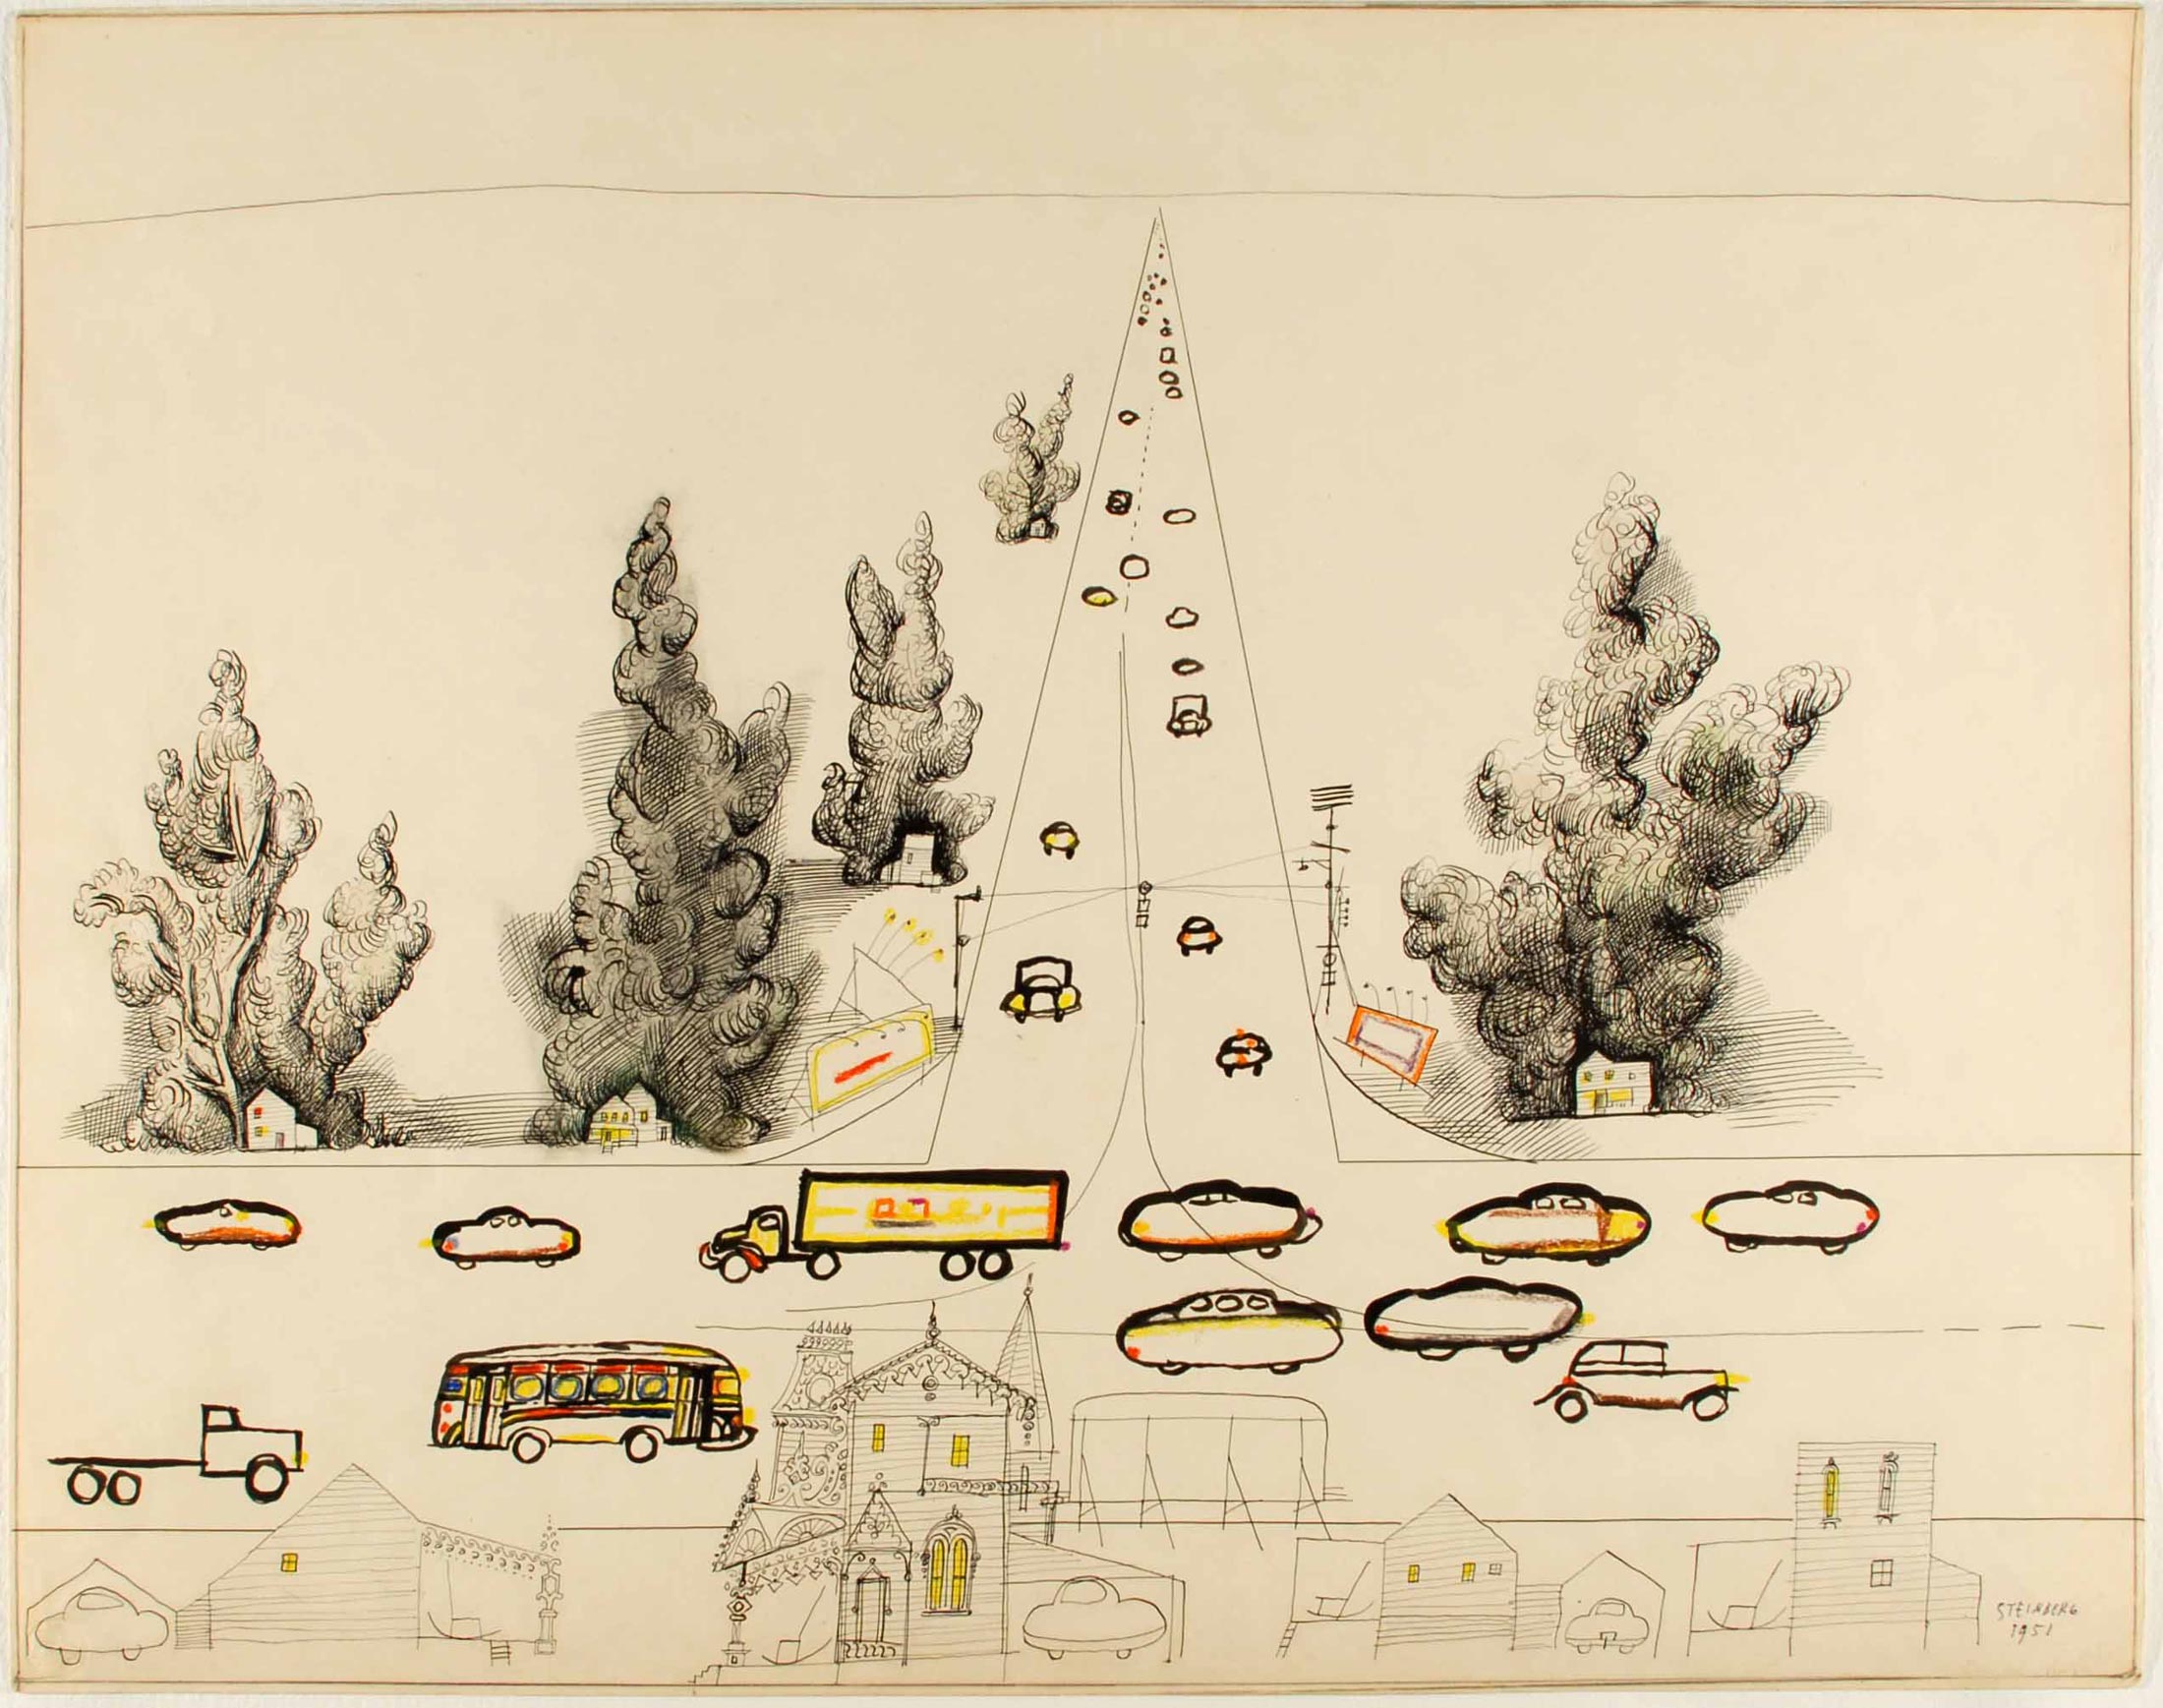 <em>Highway</em>, 1951. Ink, crayon, and pencil on paper, 23 x 29 in. National Gallery of Art, Prague; Gift of The Saul Steinberg Foundation.